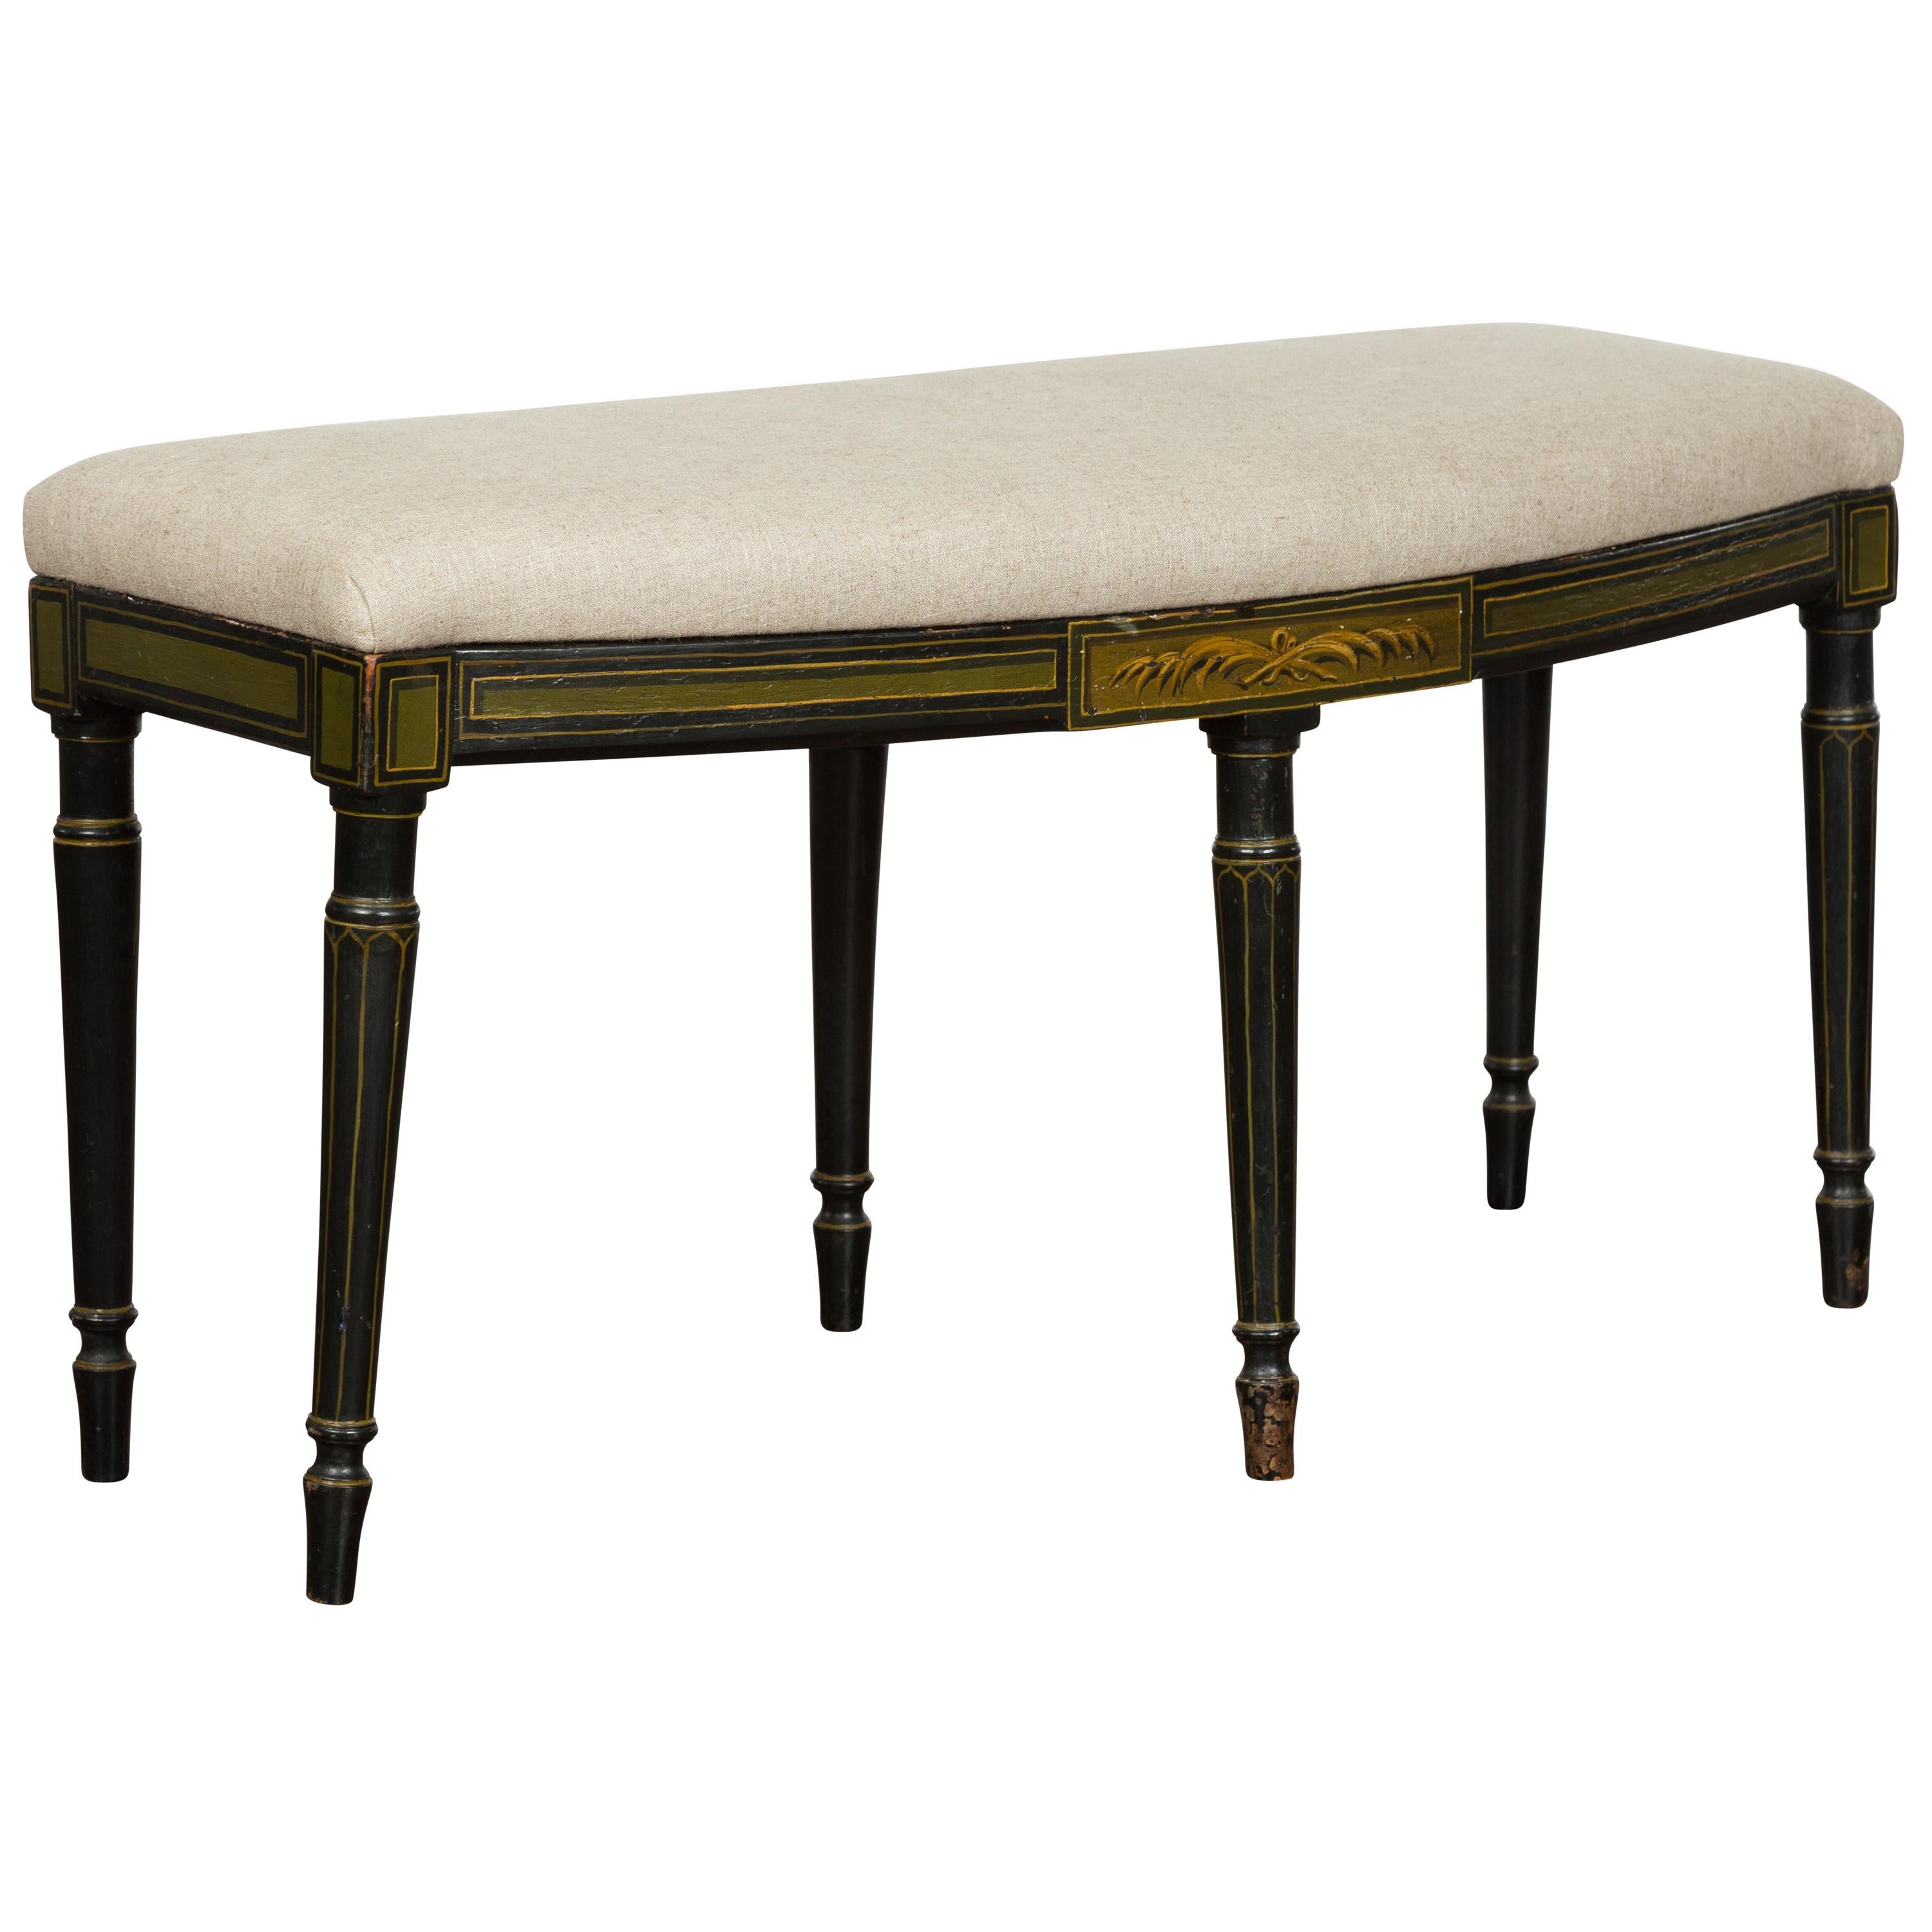 English 1820s Regency Period Black Bench with Painted Foliage and New Upholstery For Sale